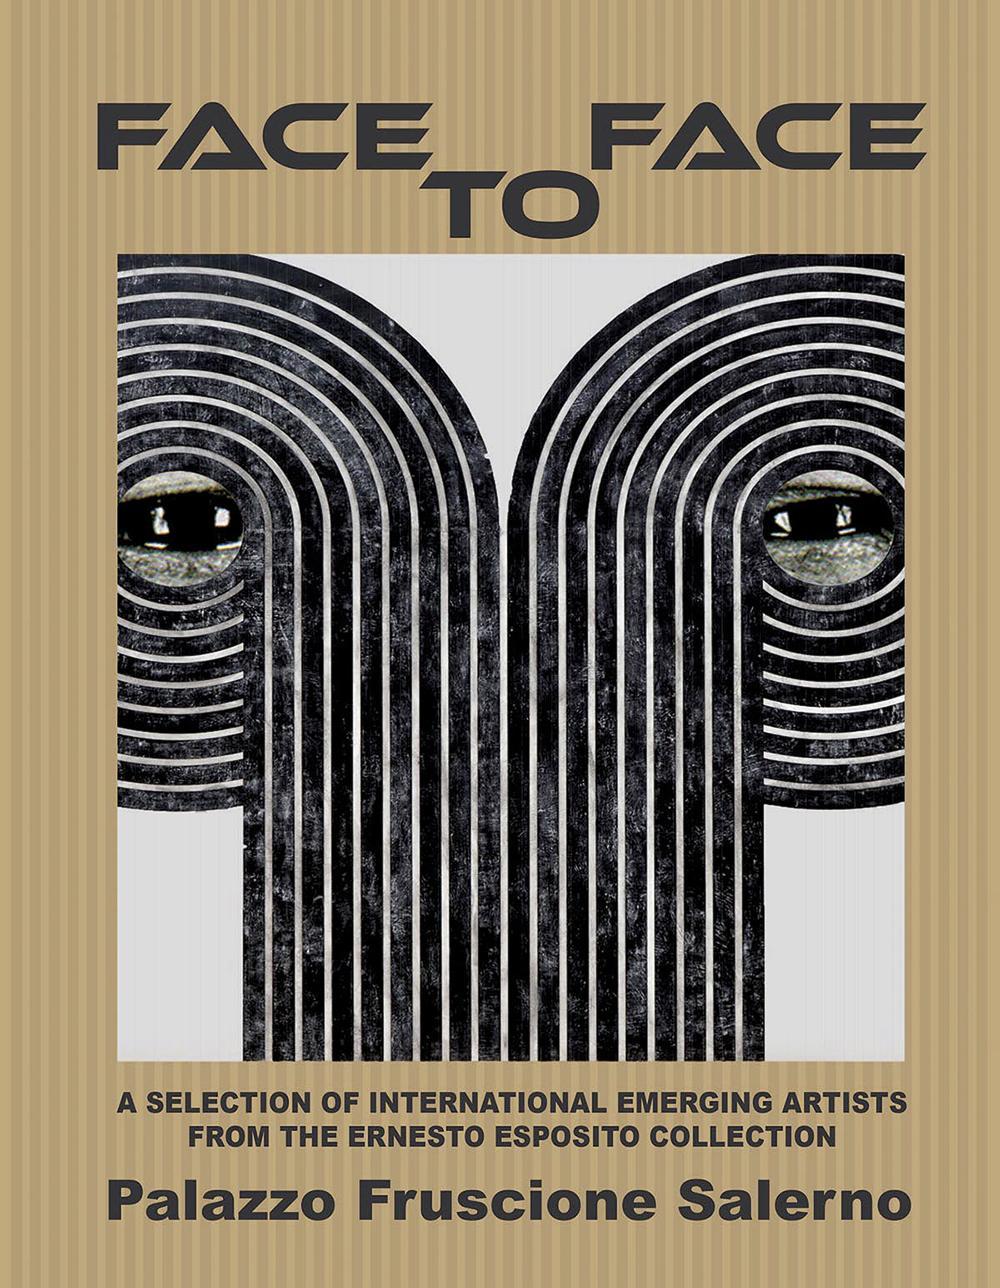 Face to face. A selection of international emerging astists from the Ernesto Esposito collection. Ediz. illustrata